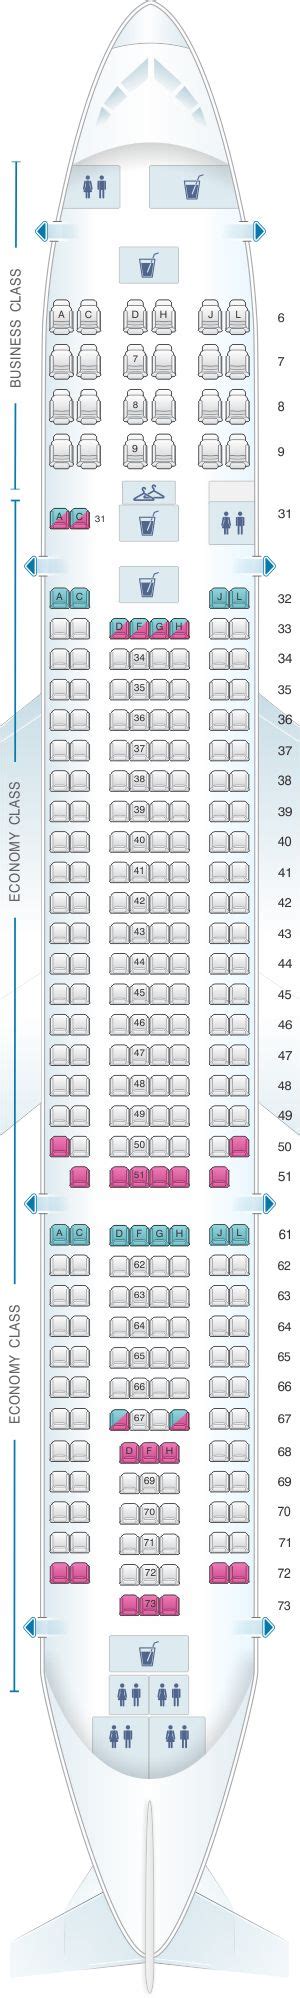 Seat Map China Eastern Airlines Airbus A300 600 Config1 Asiana